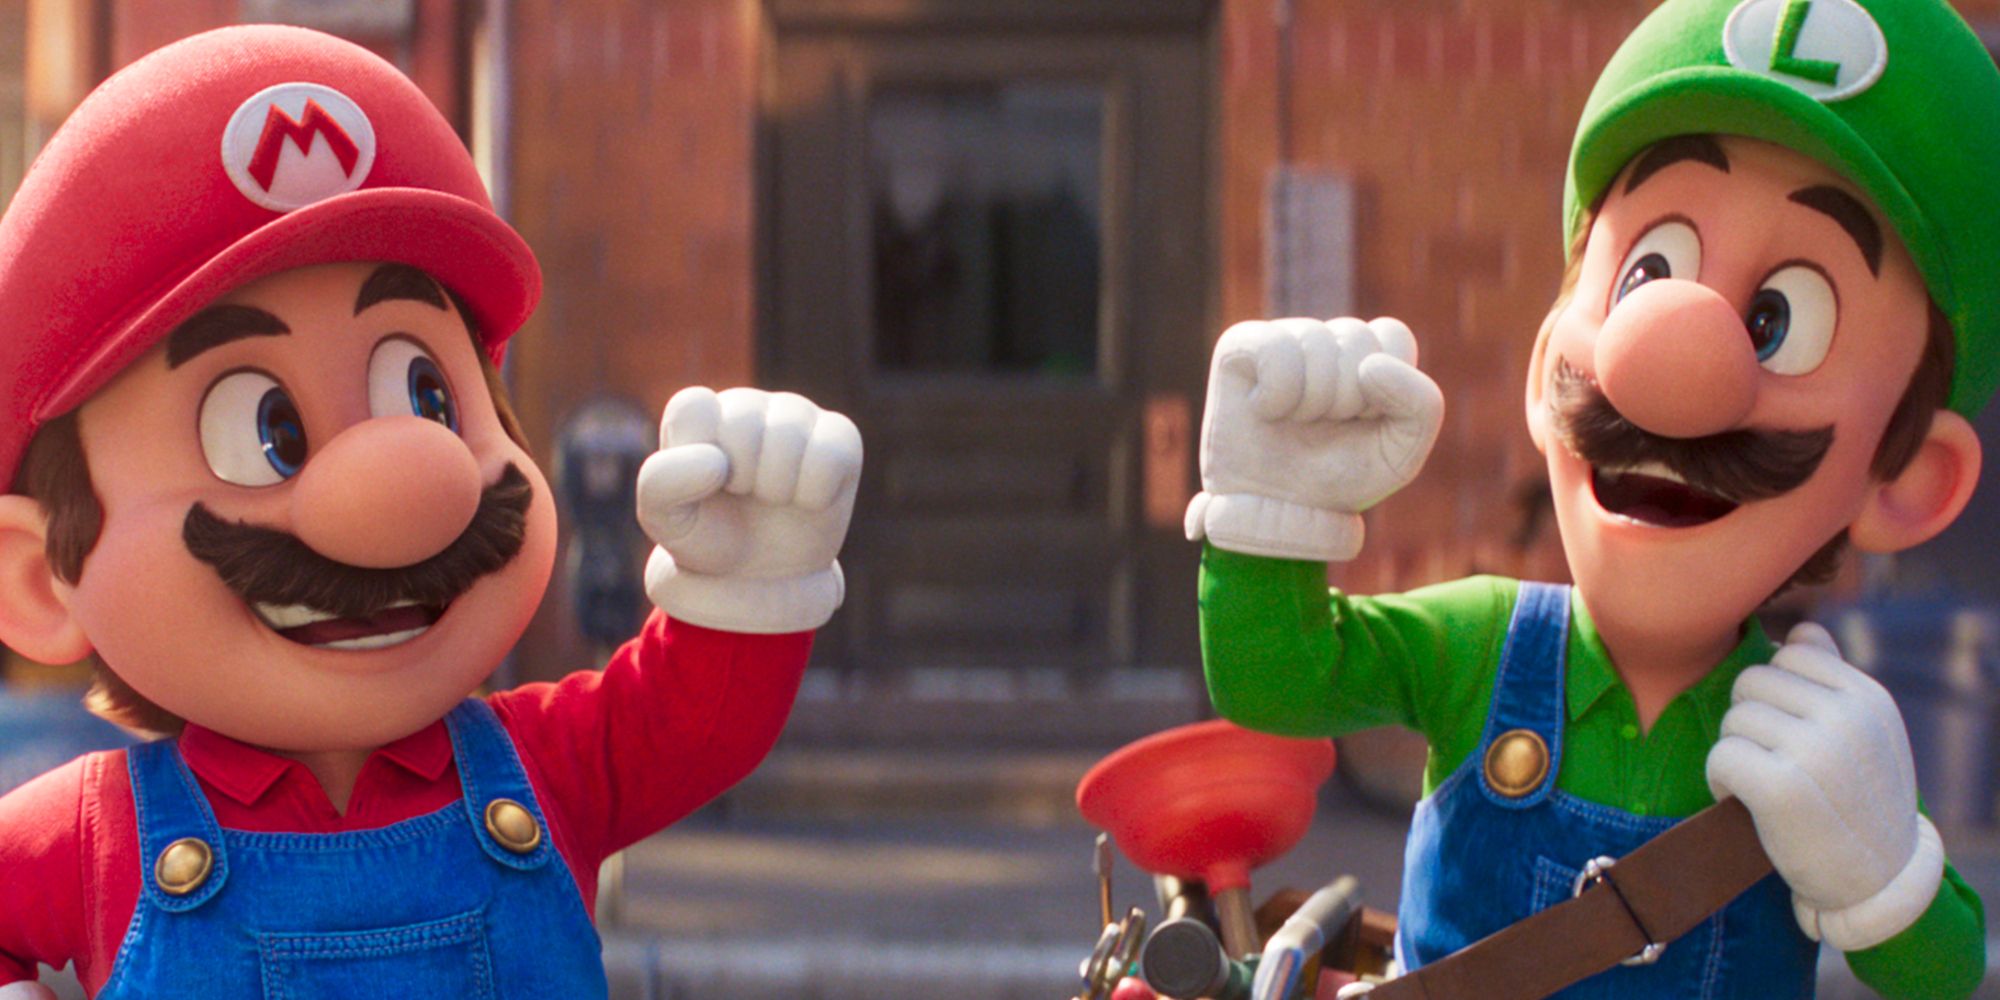 Chris Pratt And Charlie Day Would Love To Return For A Mario Bros. Movie Sequel